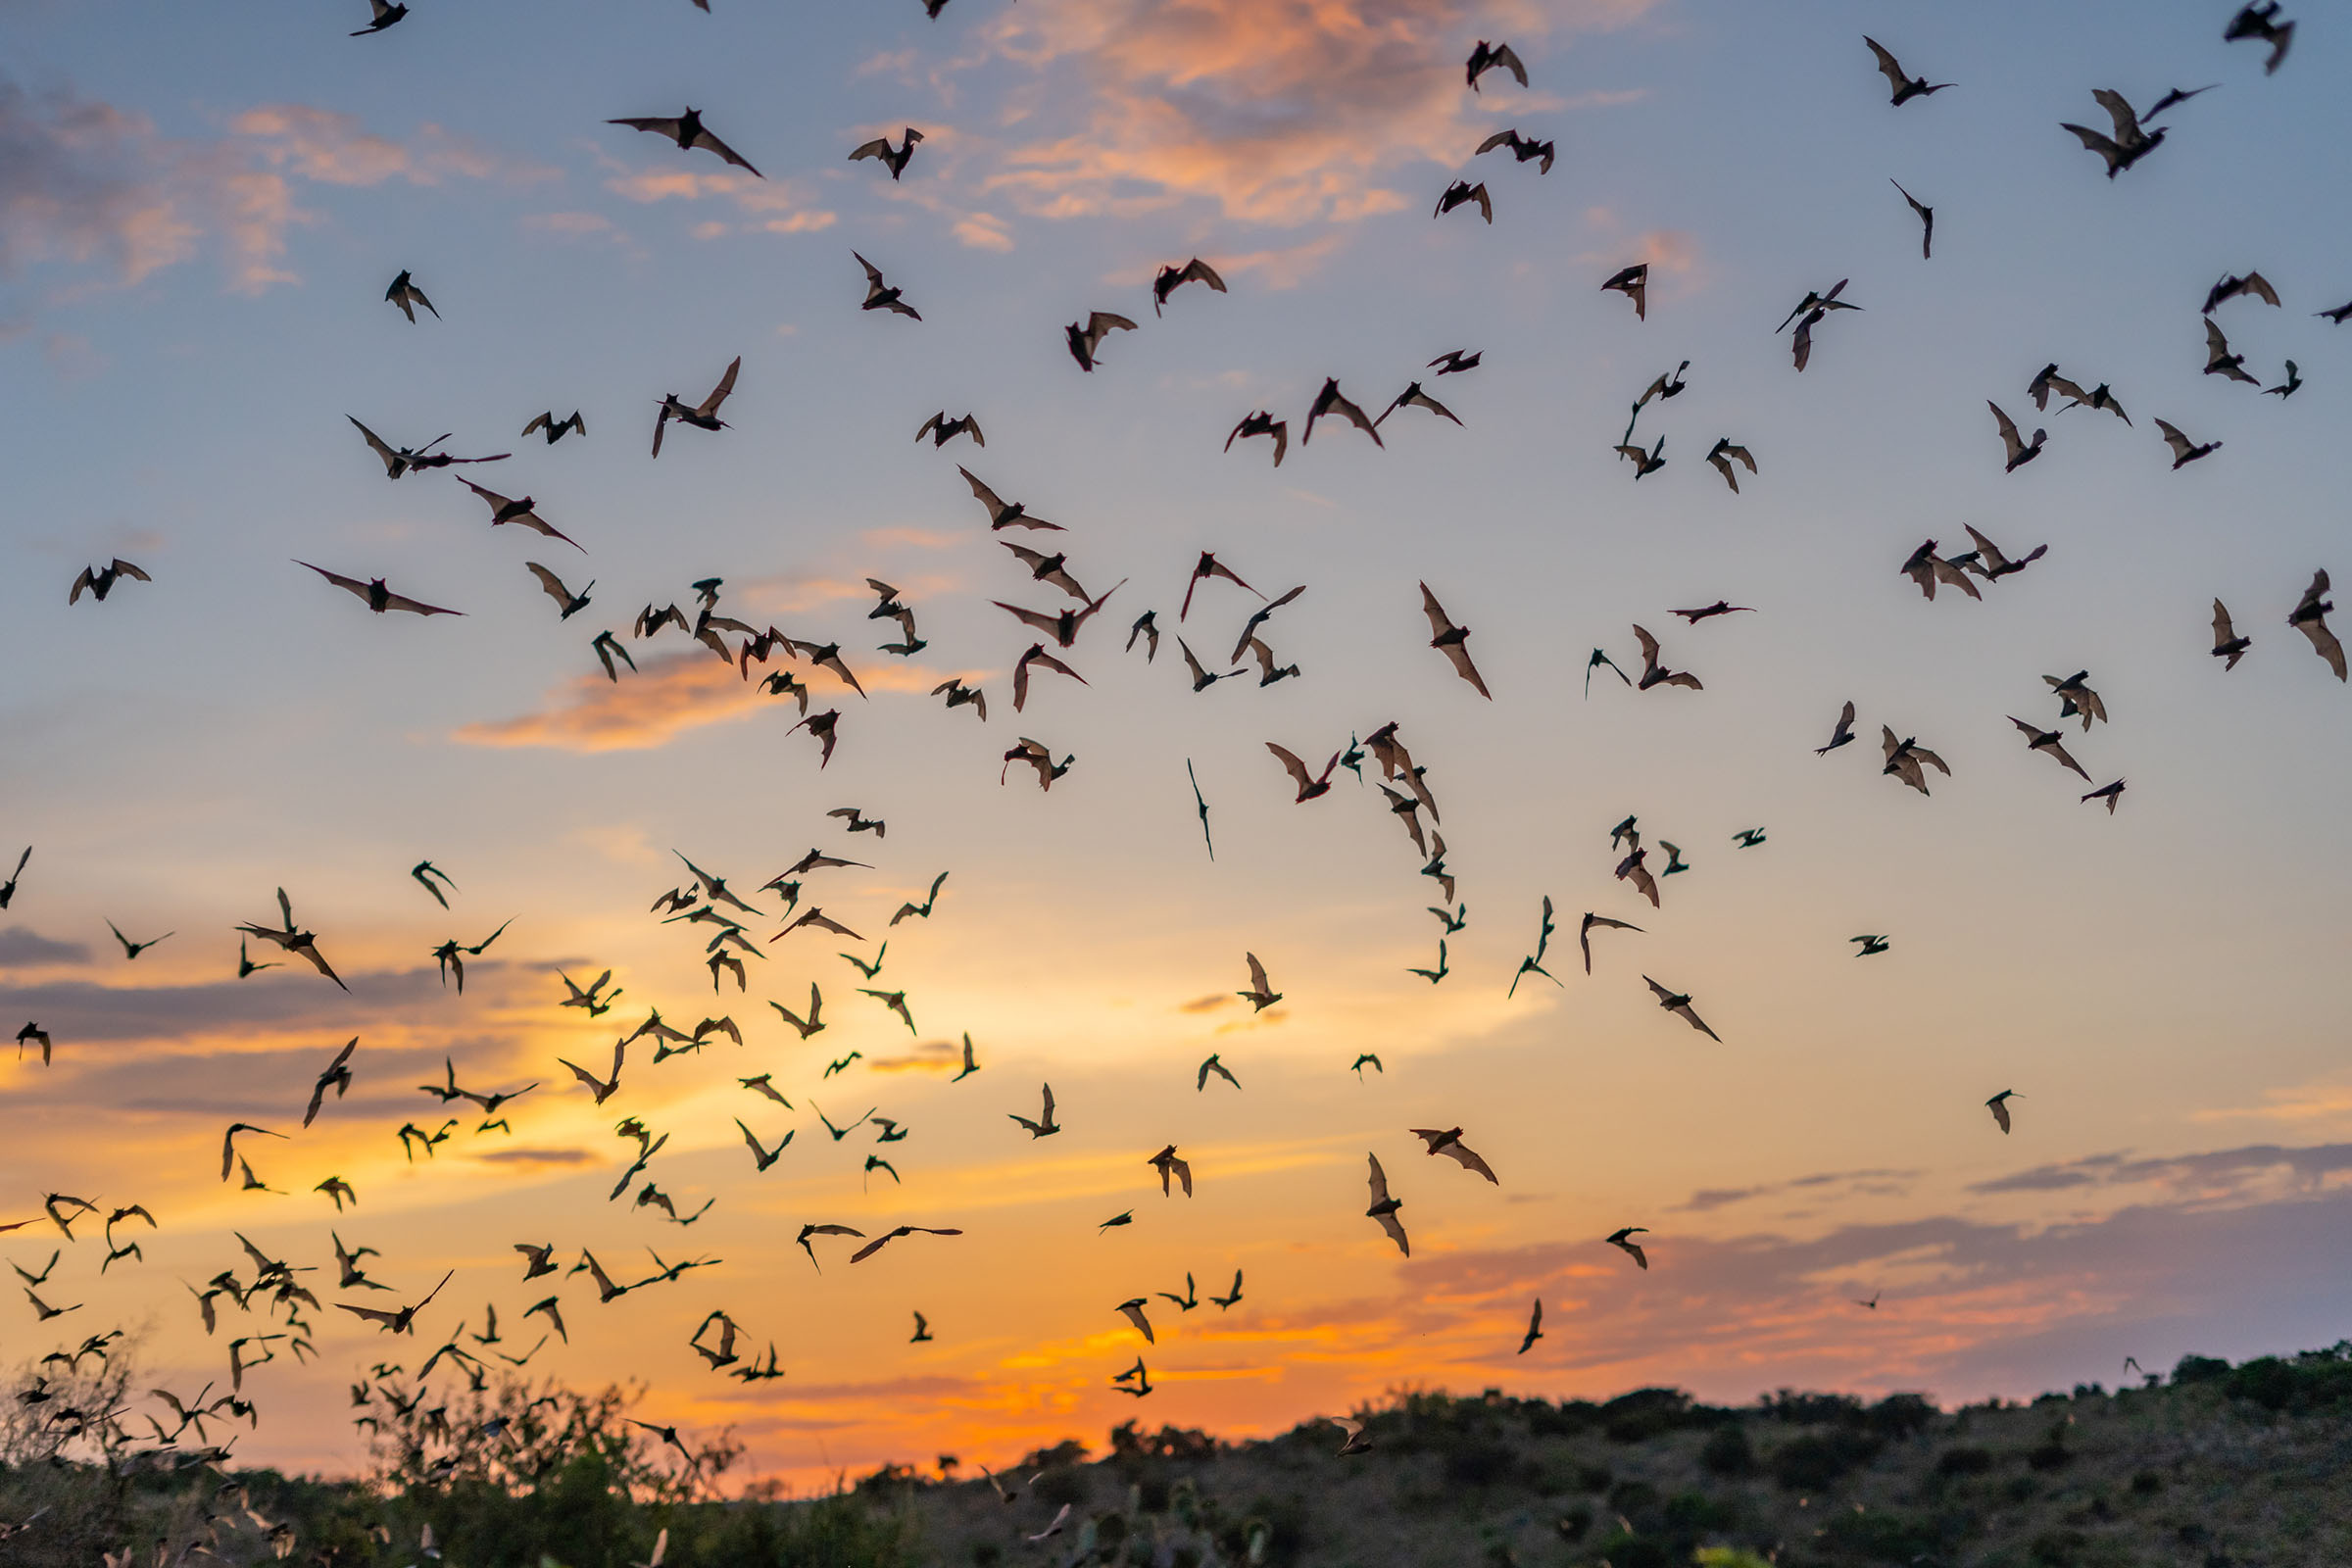 A sky full of black bats in front of a setting sun